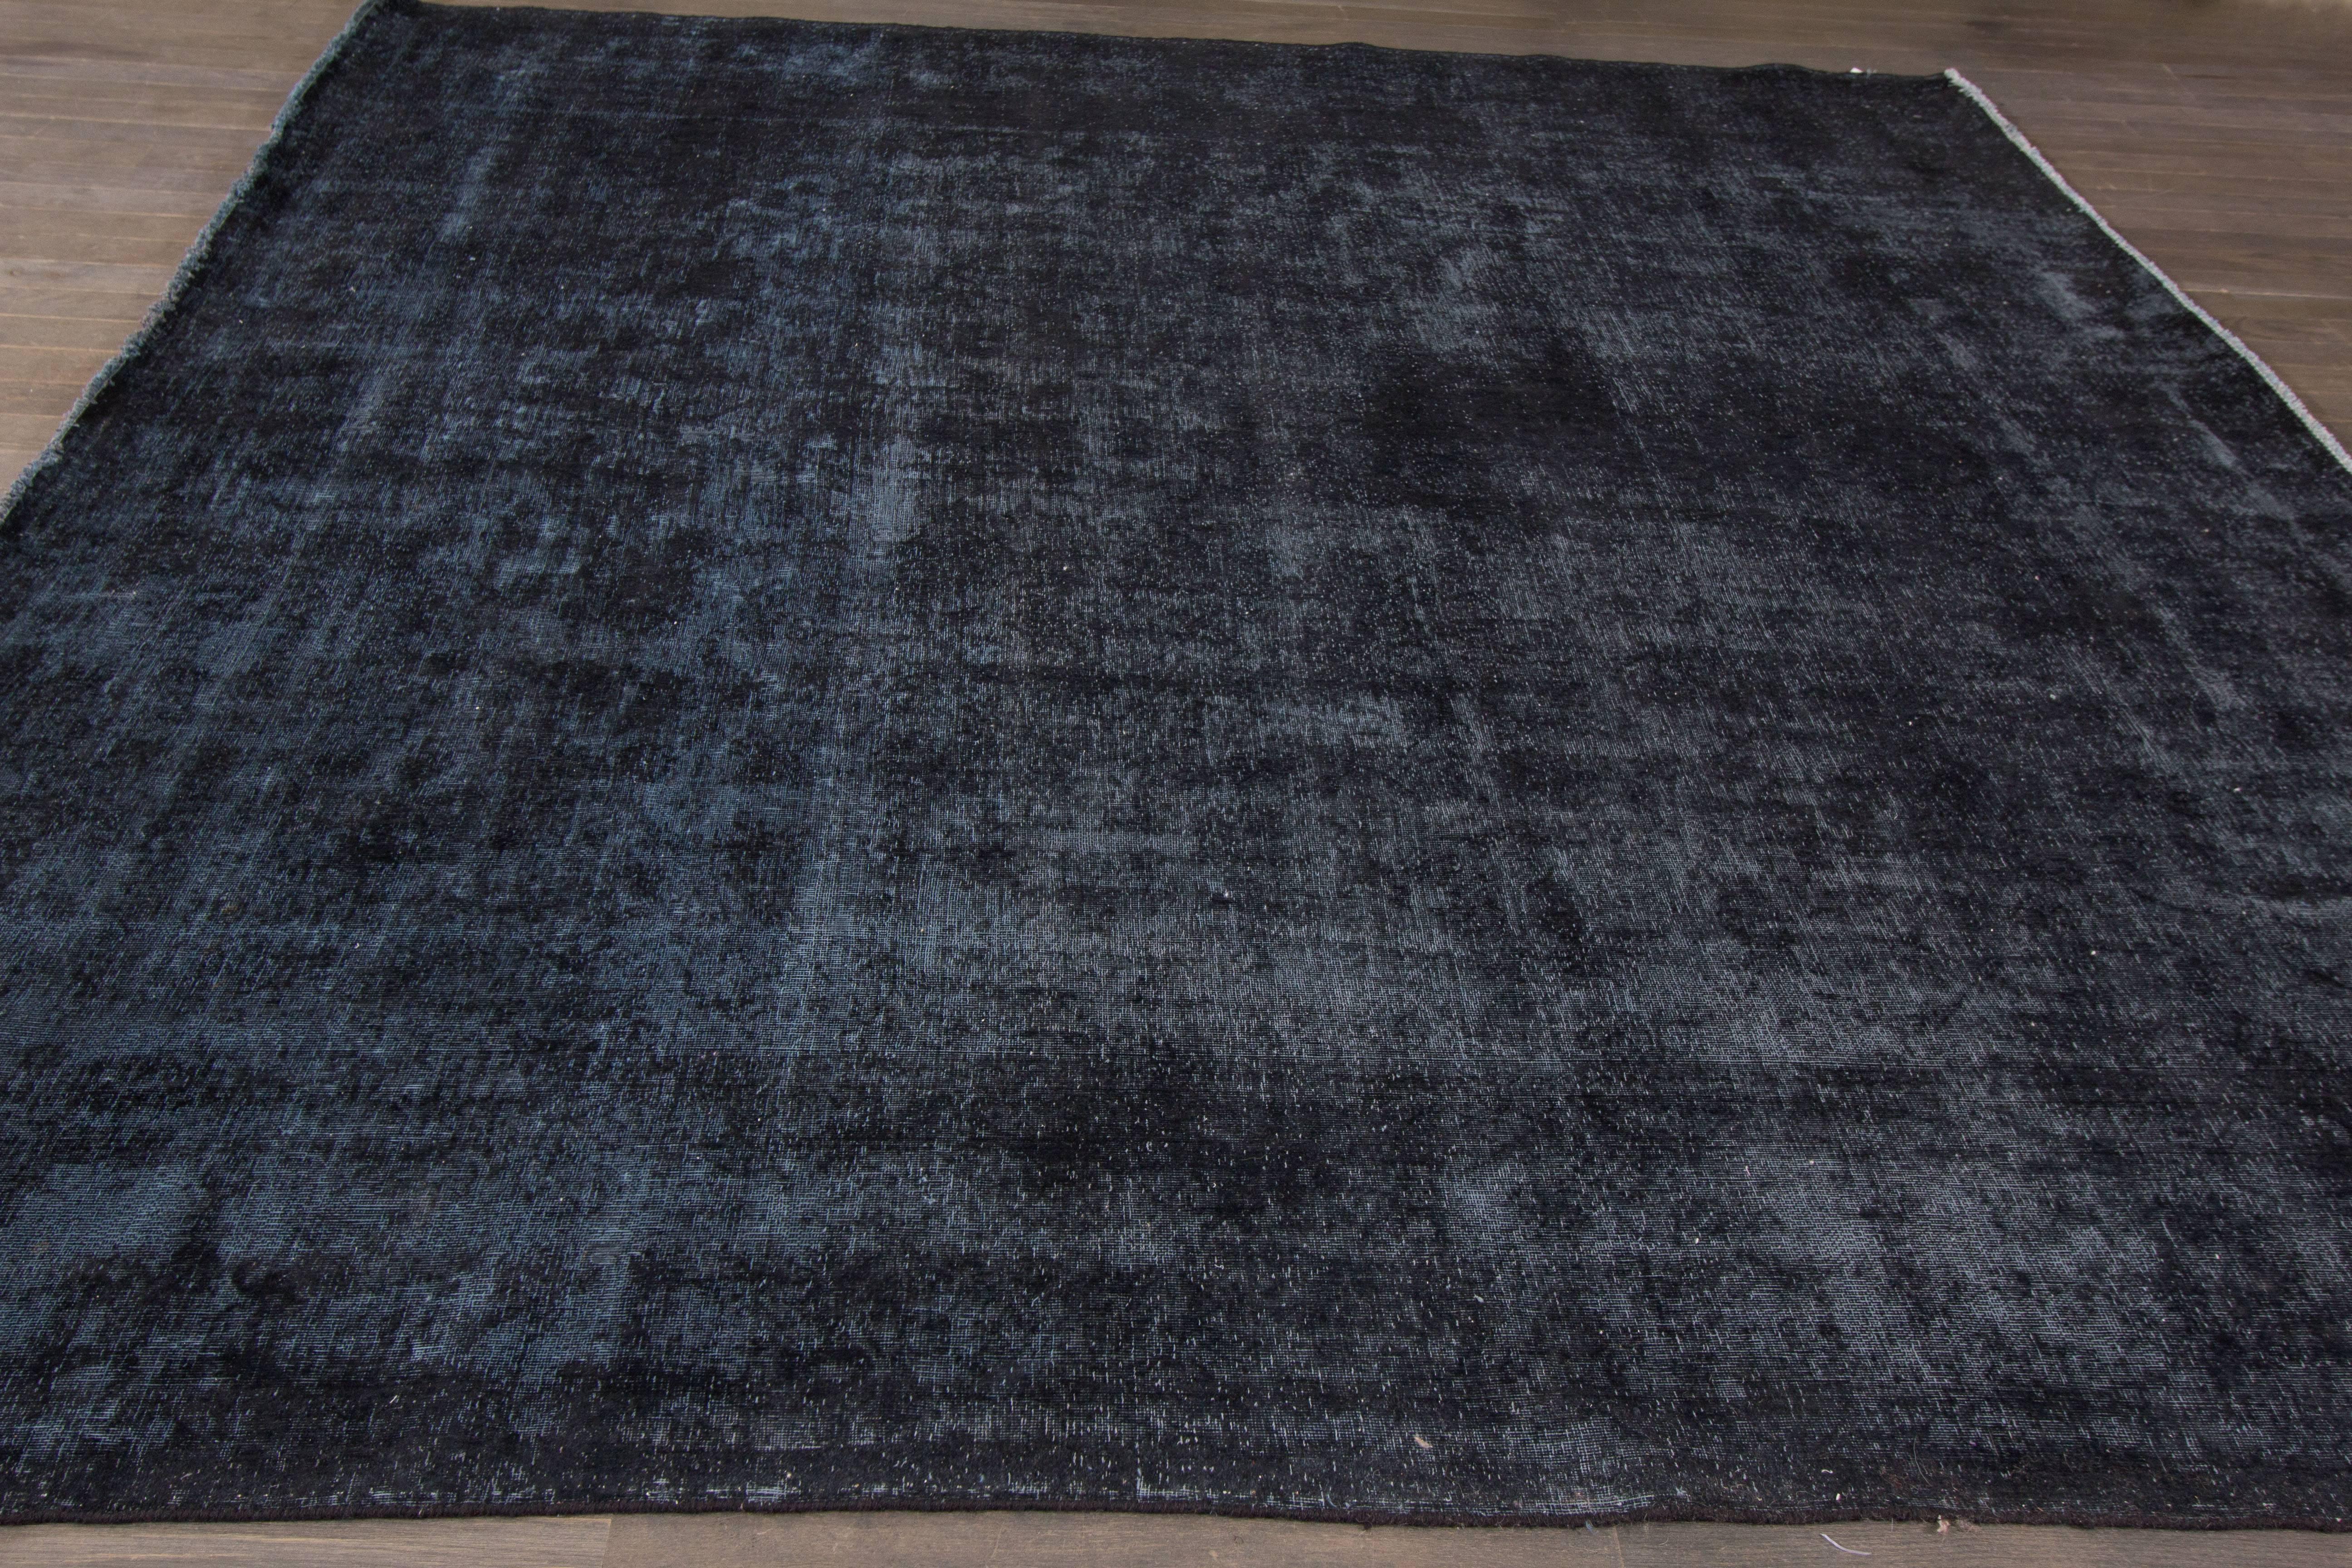 A hand-knotted square overdyed rug with an all-over design on a dark blue field. Accents of ivory and blue throughout the piece. This rug measures 9'.4 x 9'.9.